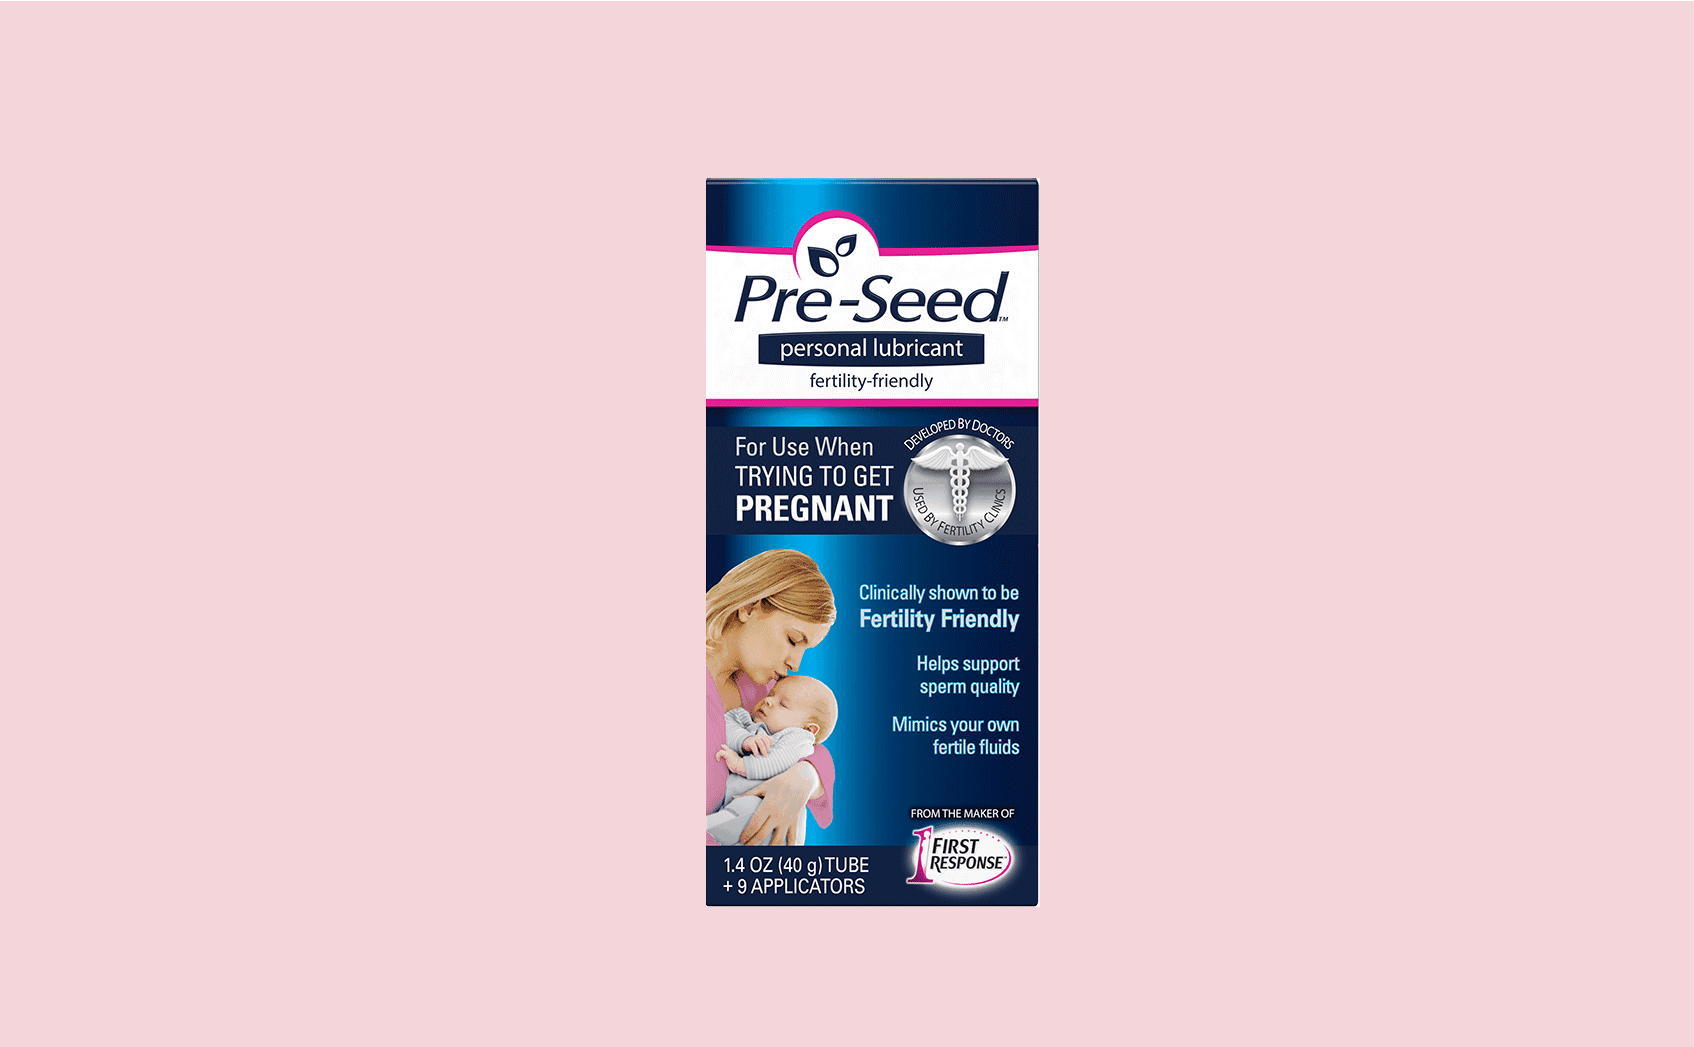  Pre-Seed Personal Lubricant, 40 Gram Tube with 9